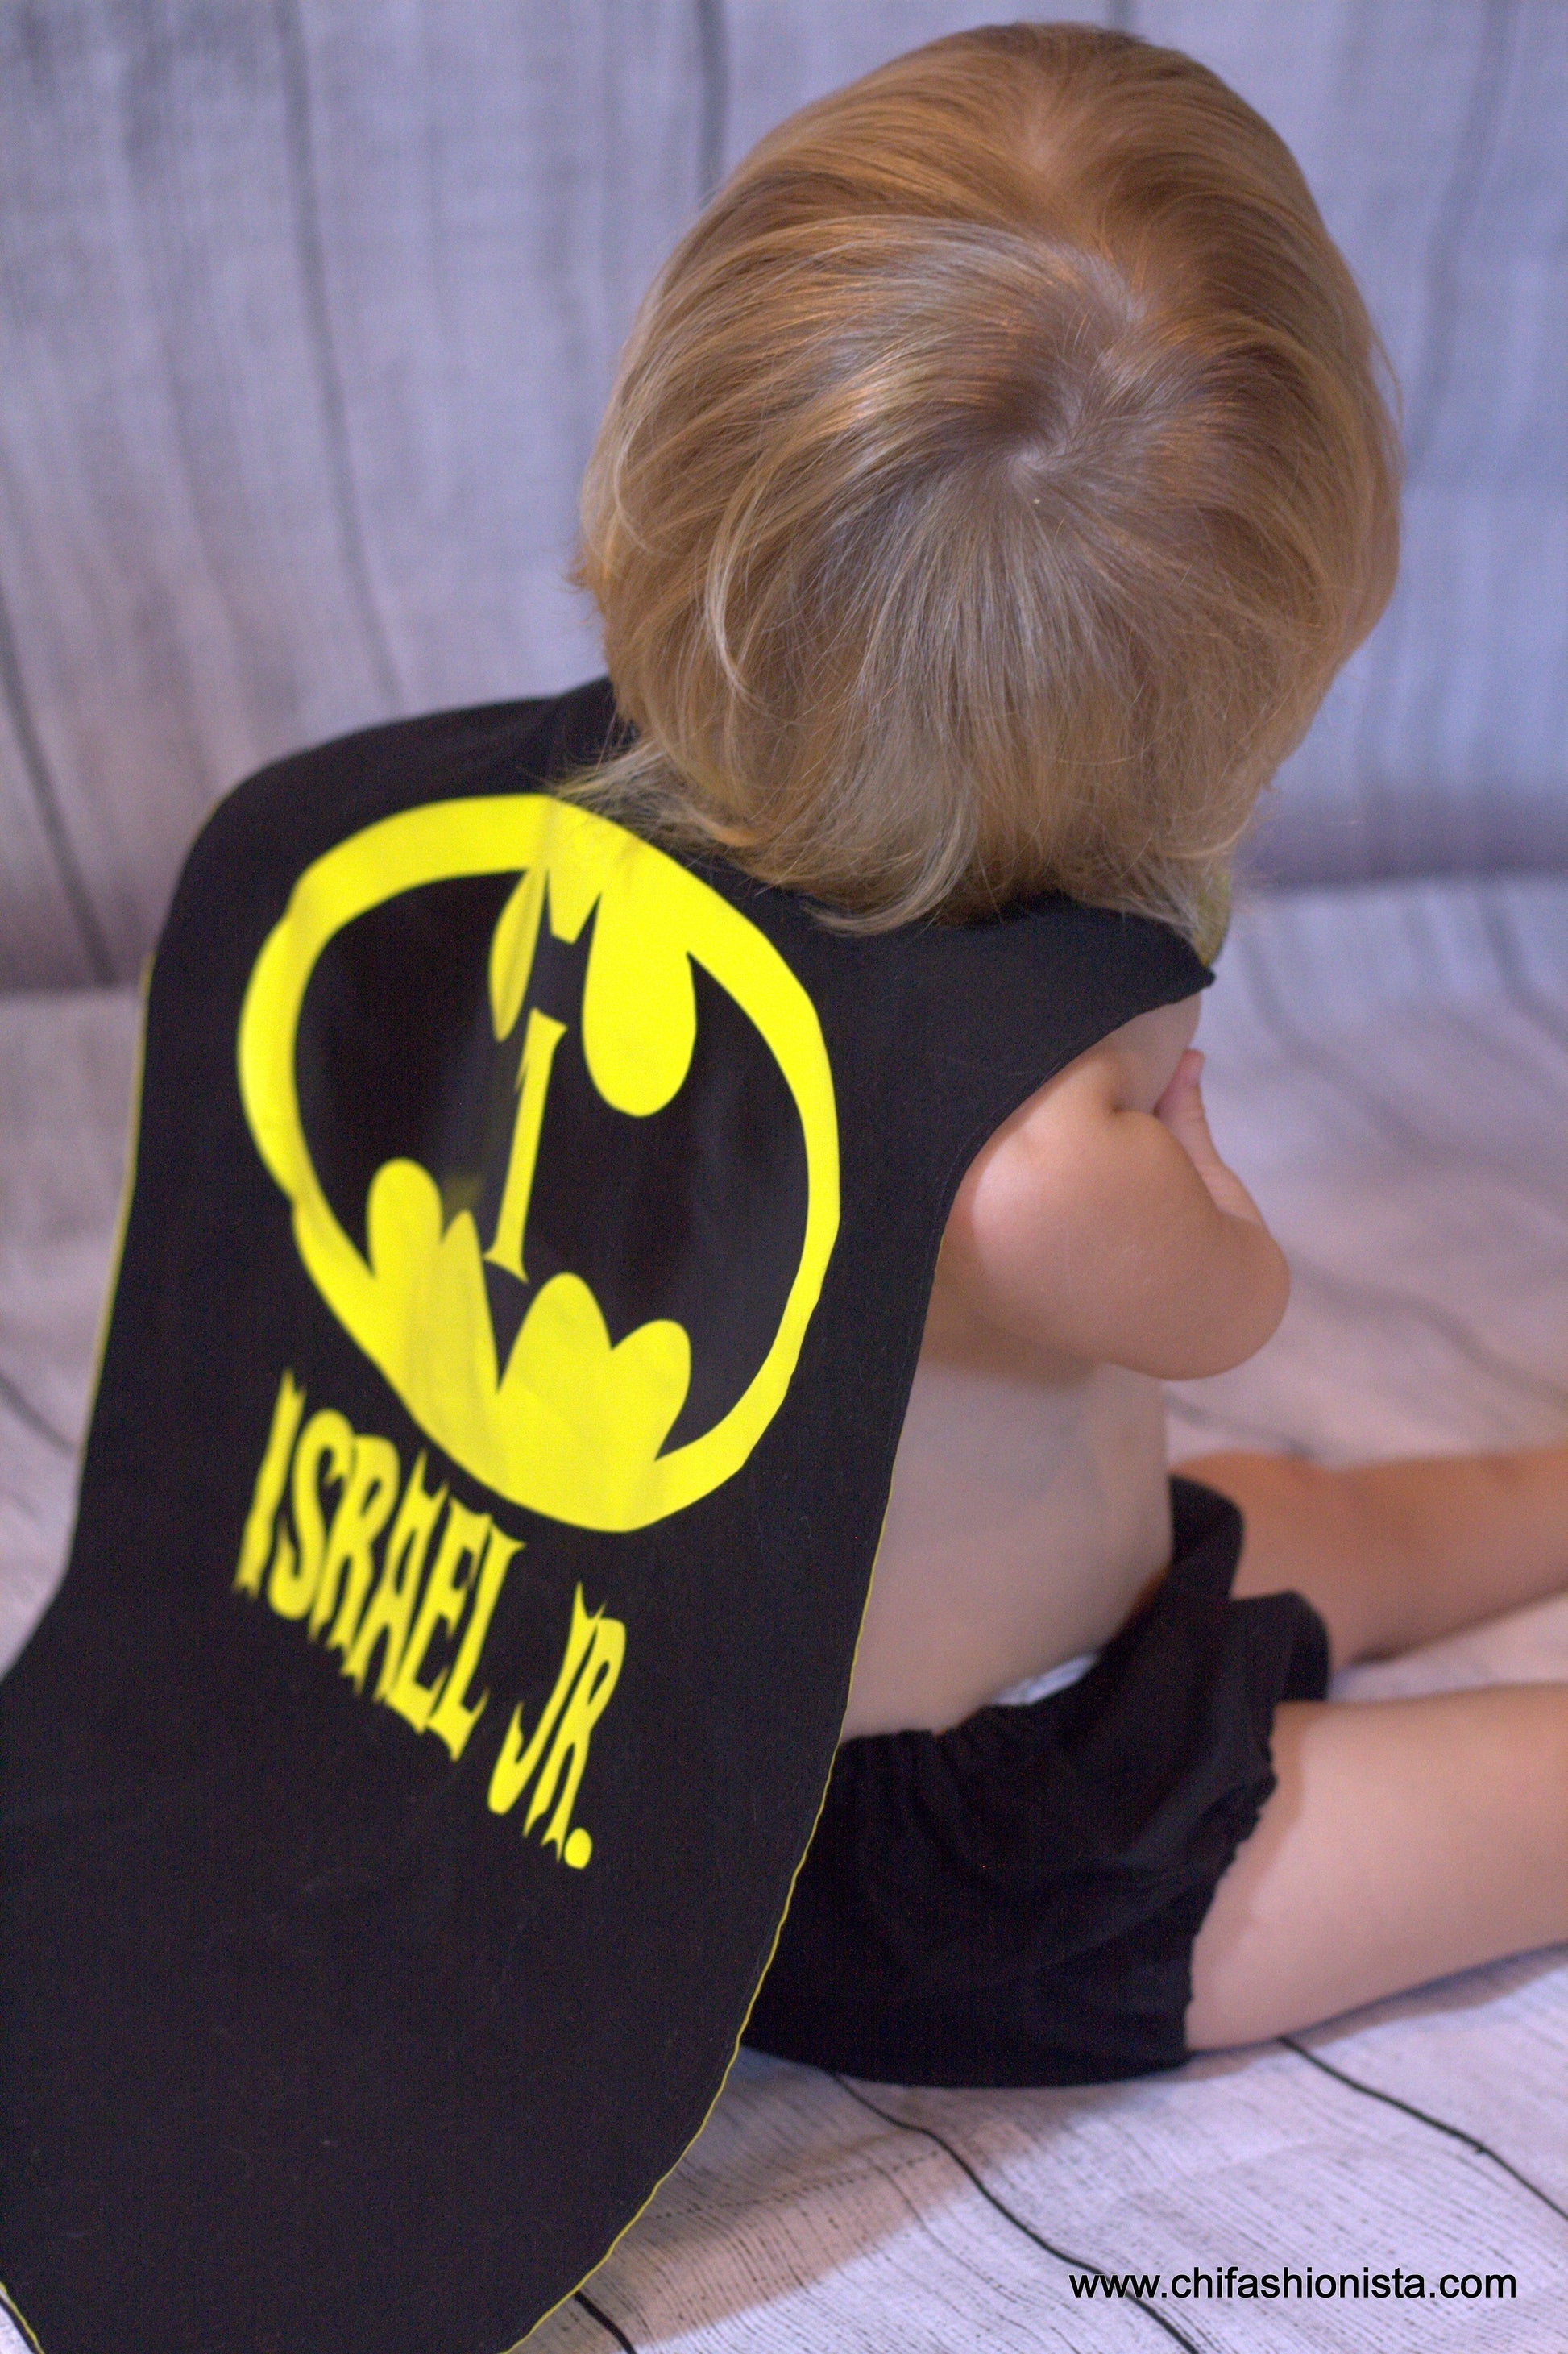 Handcrafted Children's Clothing, Clothing for Children and Parents, Bat Cape, chi-fashionista